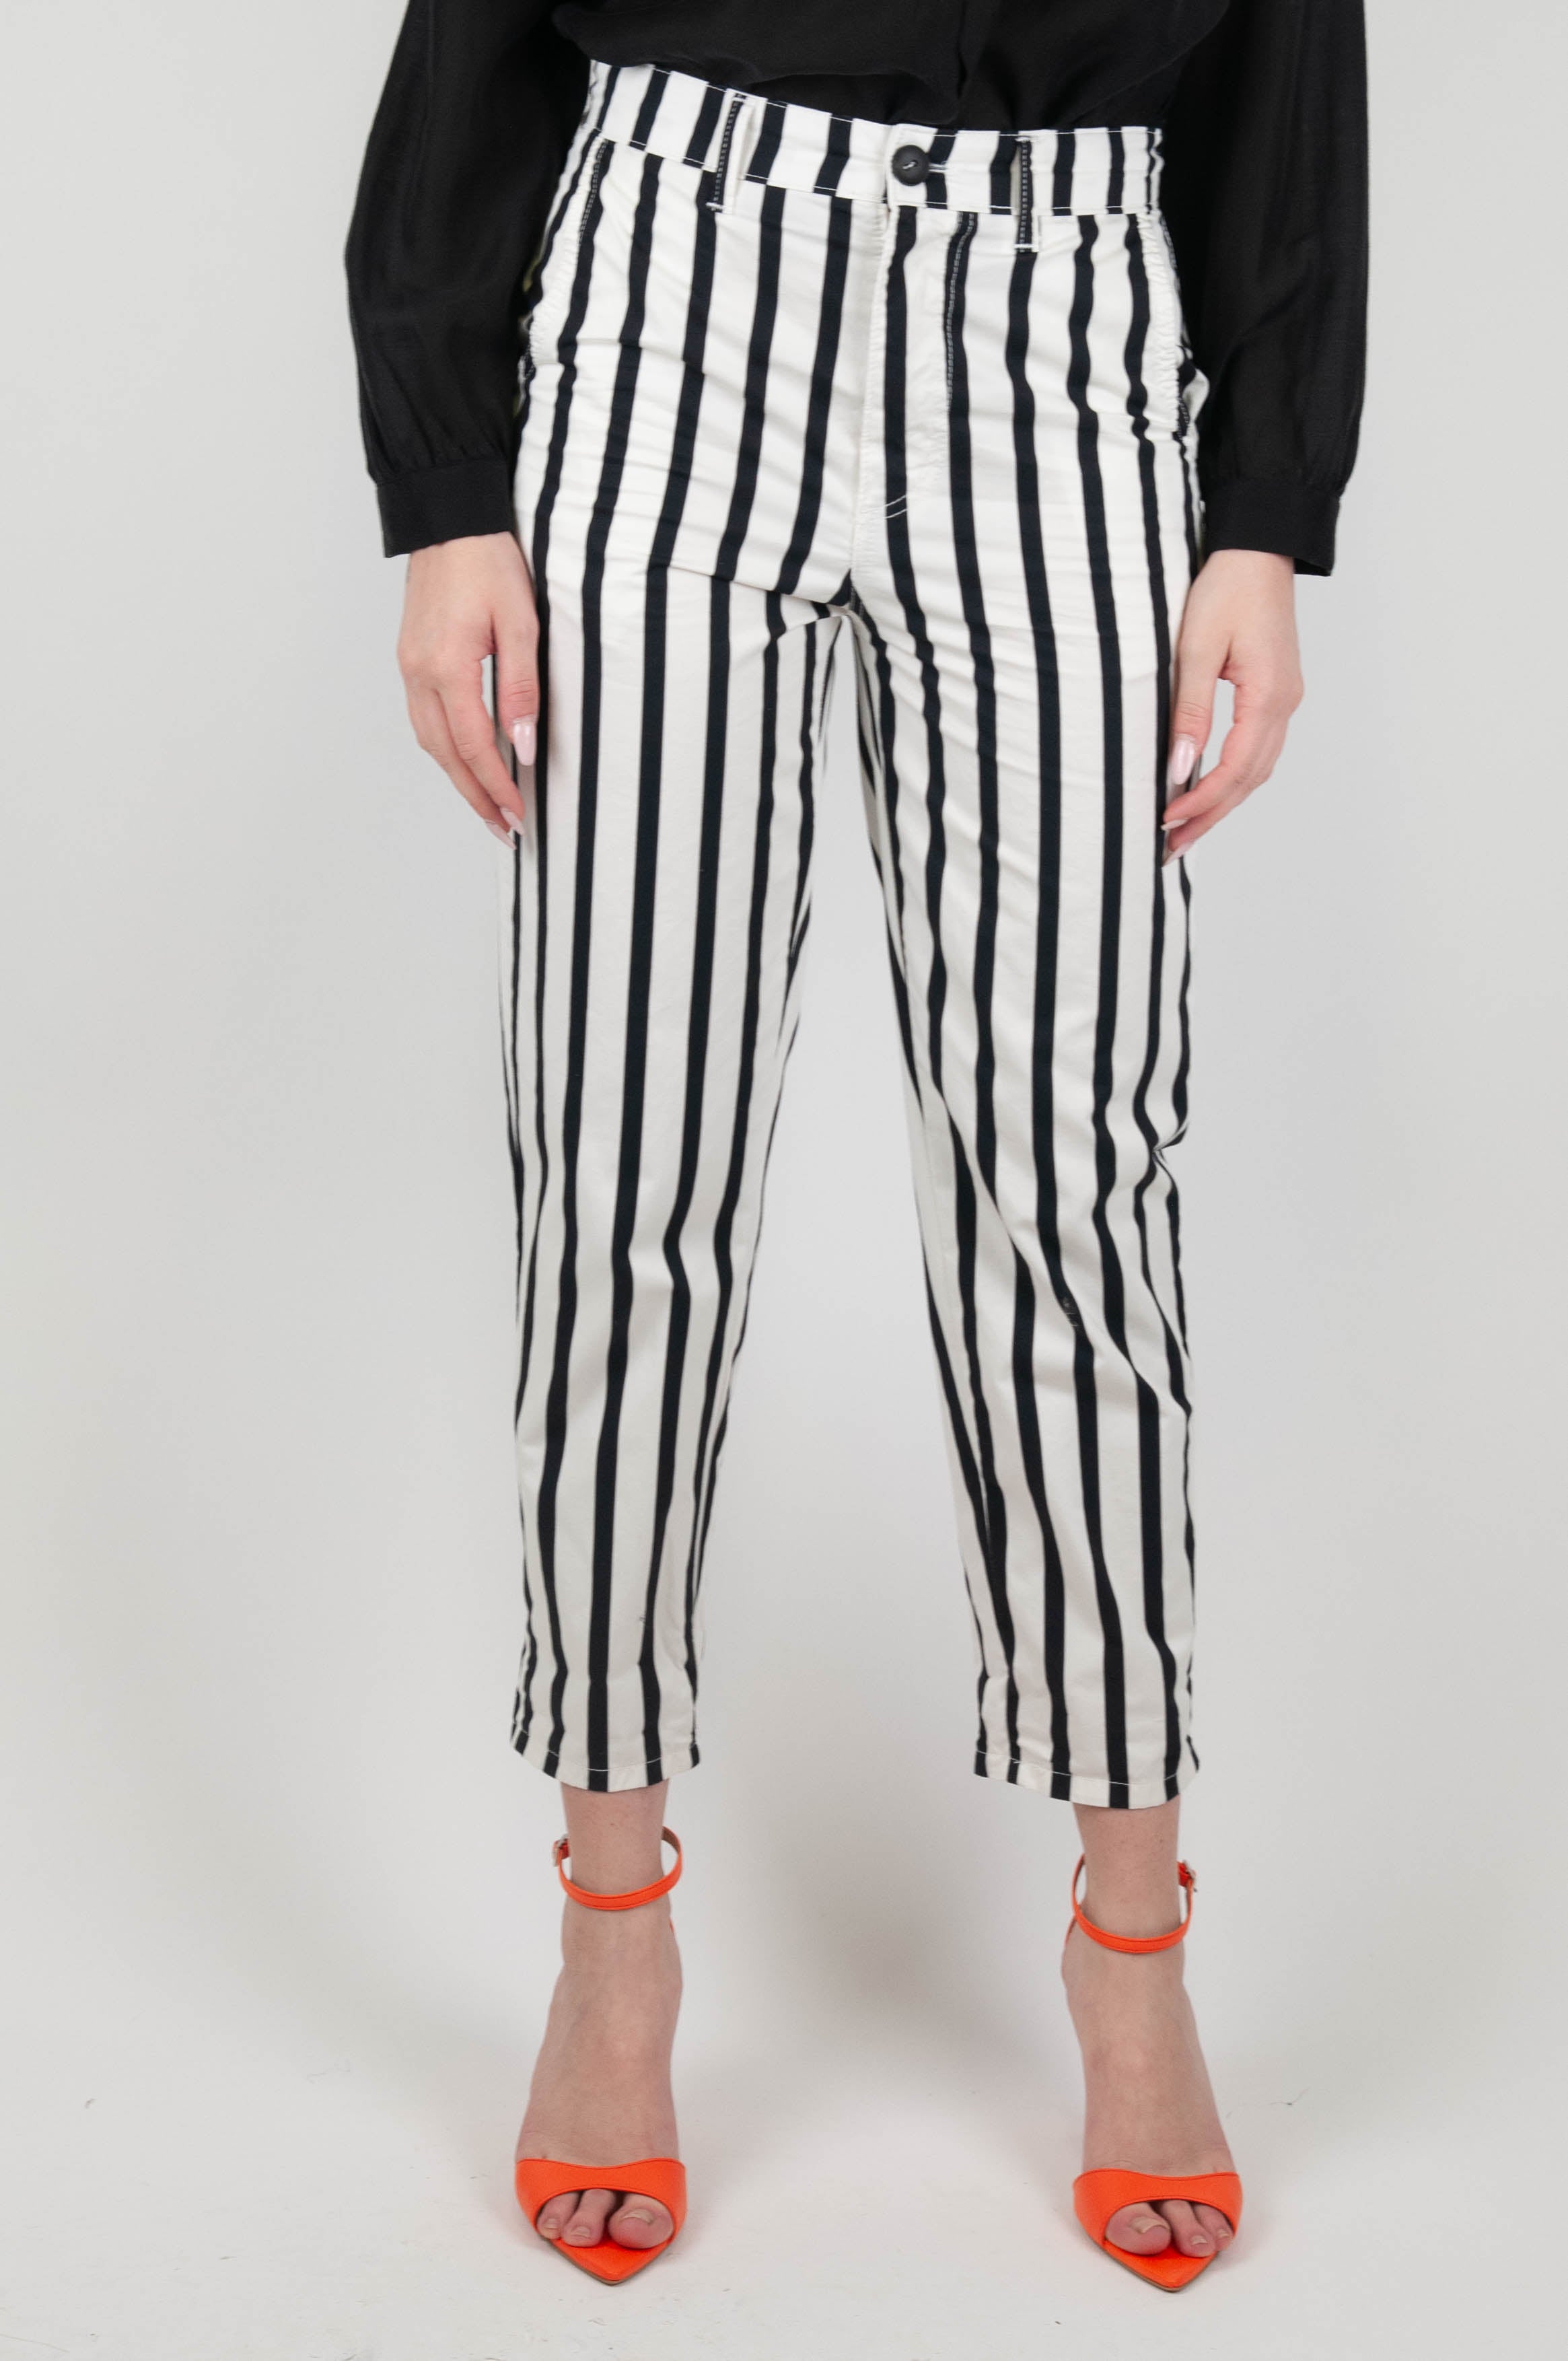 Tension in - Slim striped patterned trousers